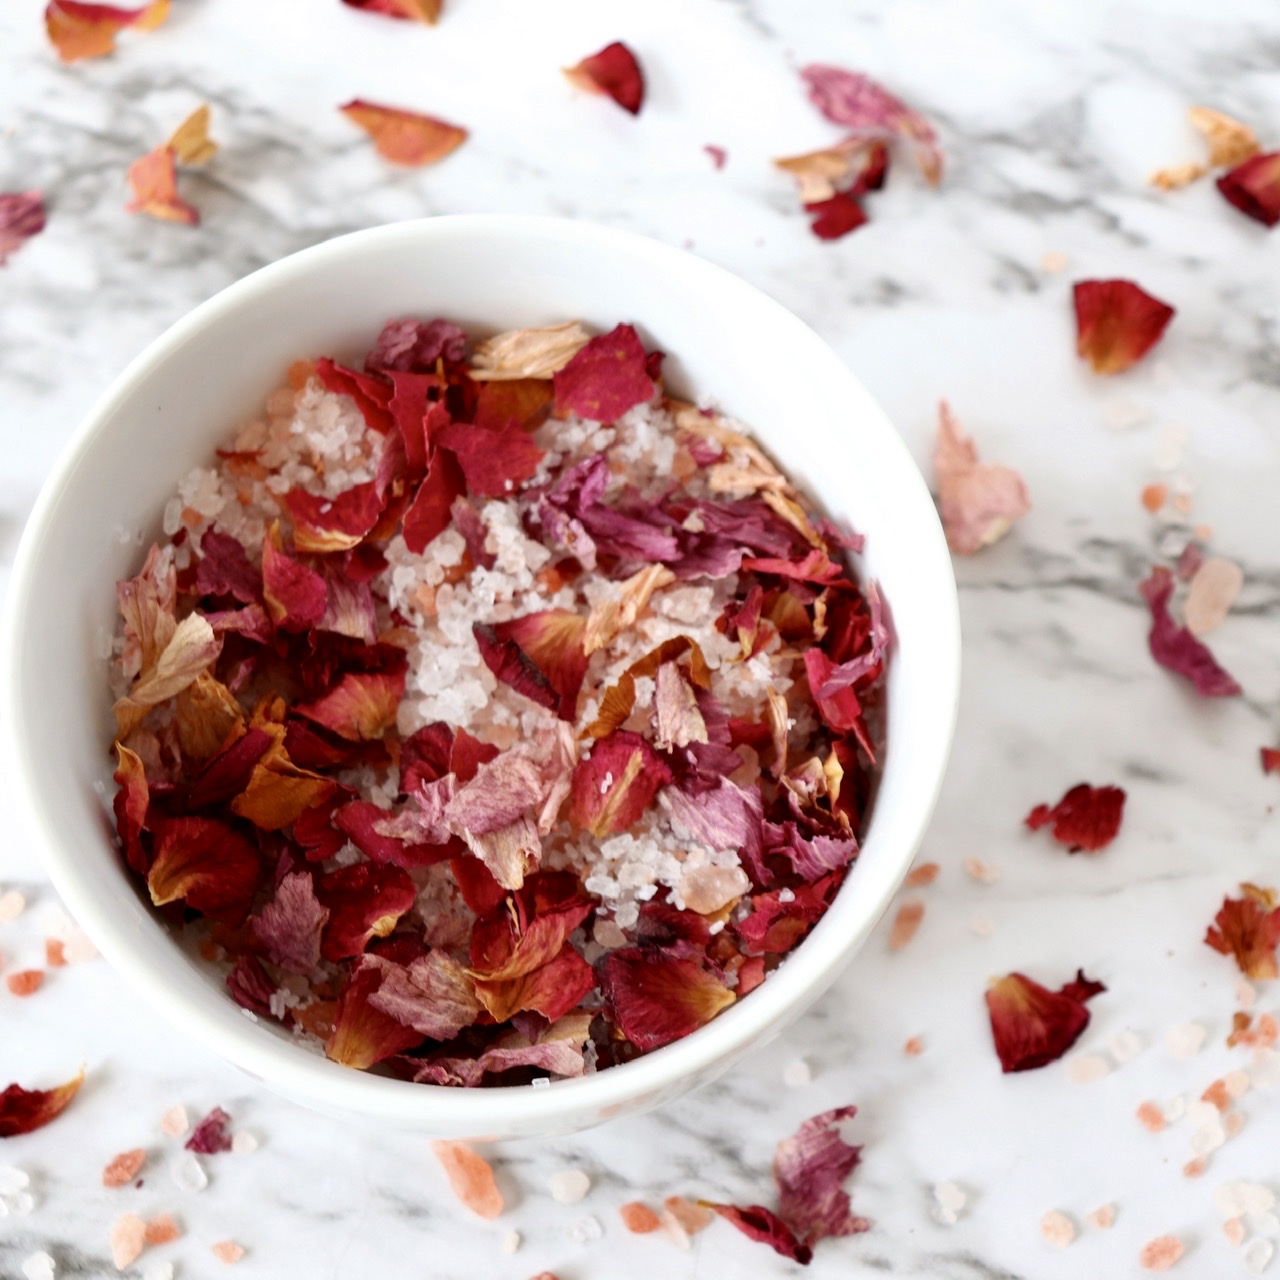 How to Make Rose Petal Bath Salts: 13 Steps (with Pictures)